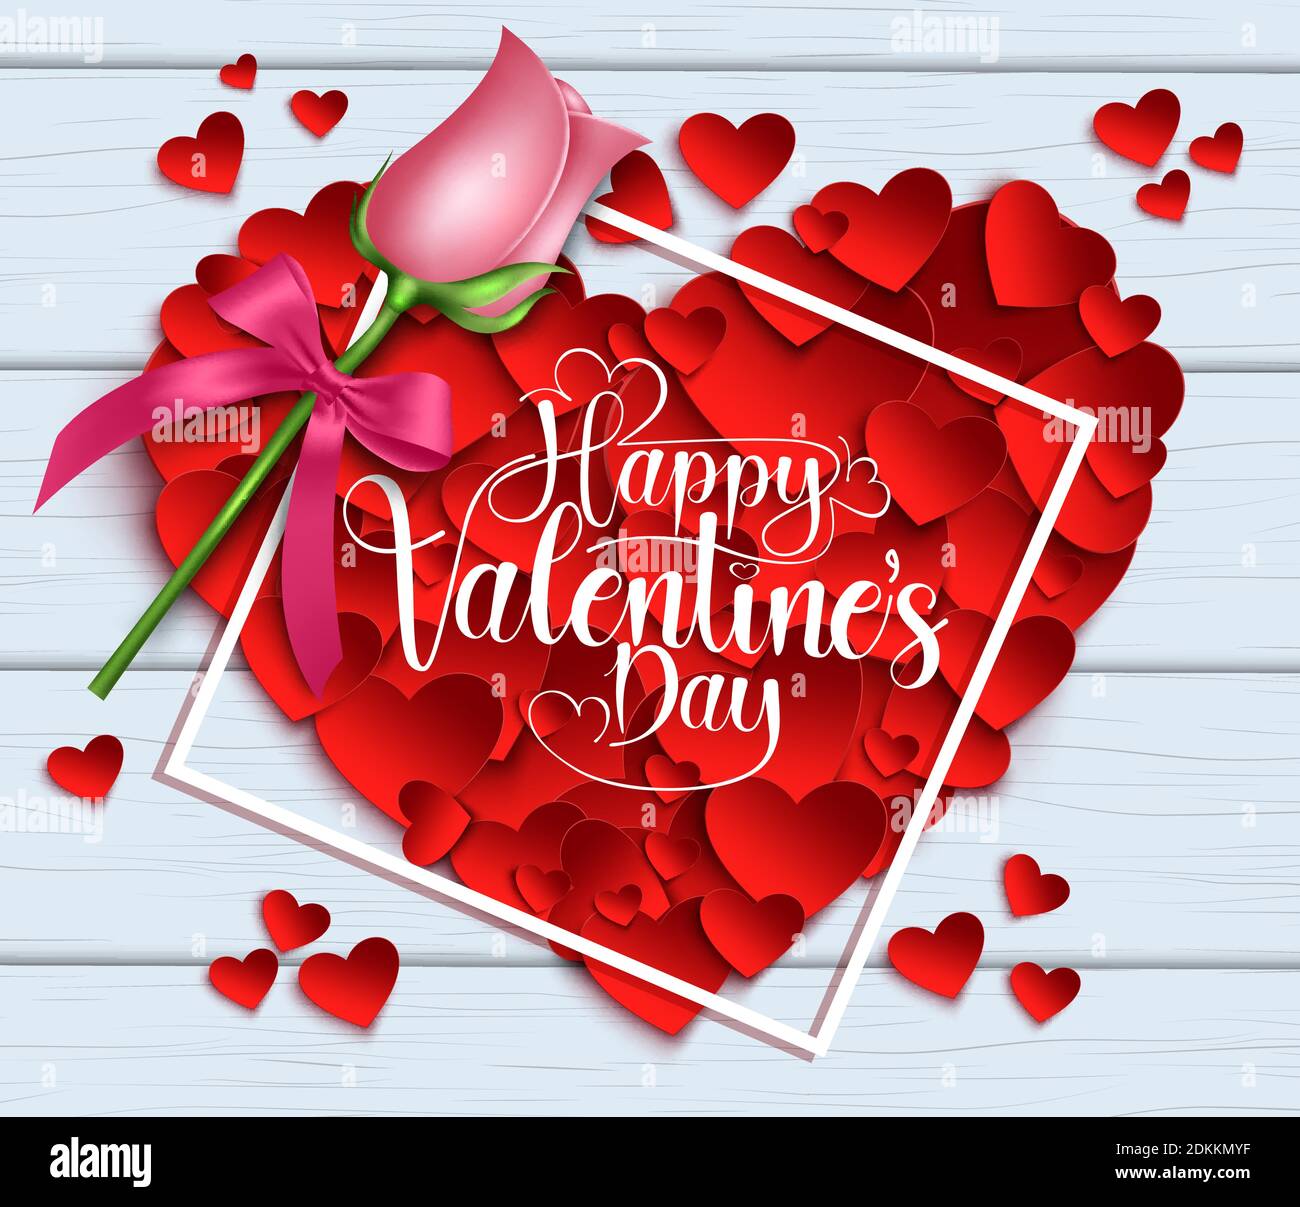 Valentines heart vector background design. Happy valentine's day text in heart shape with frame and pink rose element for valentines day decoration. Stock Vector